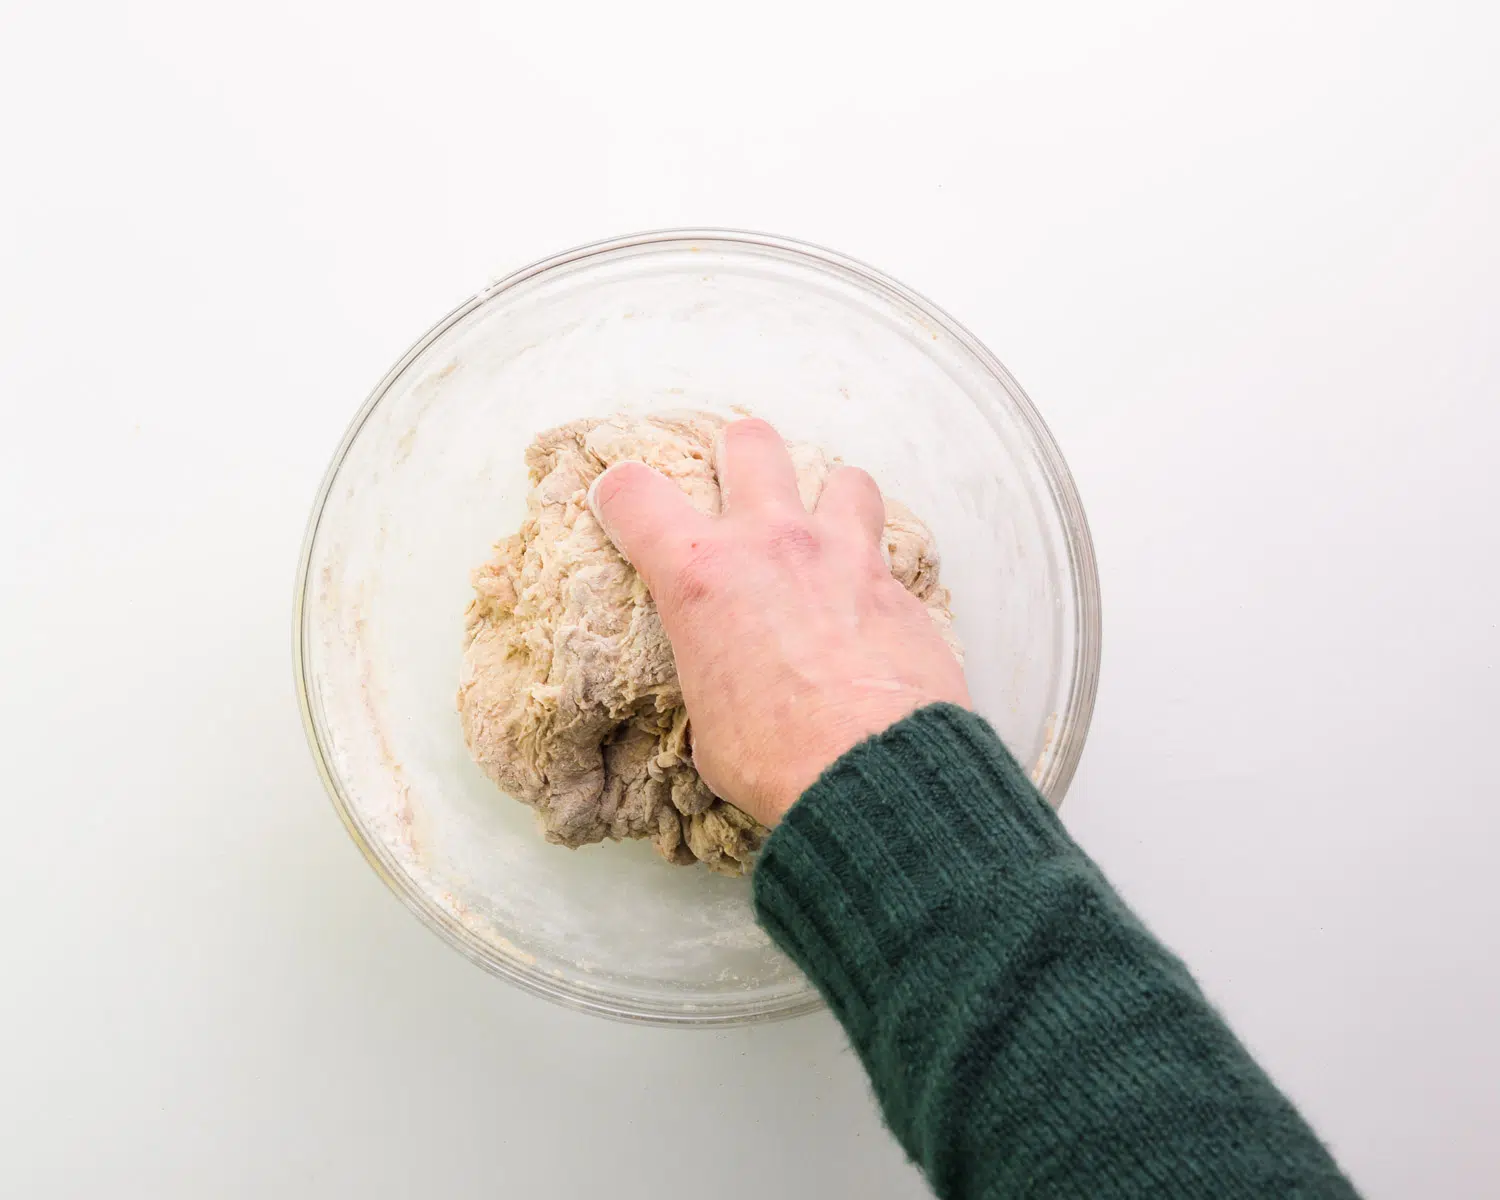 A hand is grabbing a ball of dough in a glass bowl.